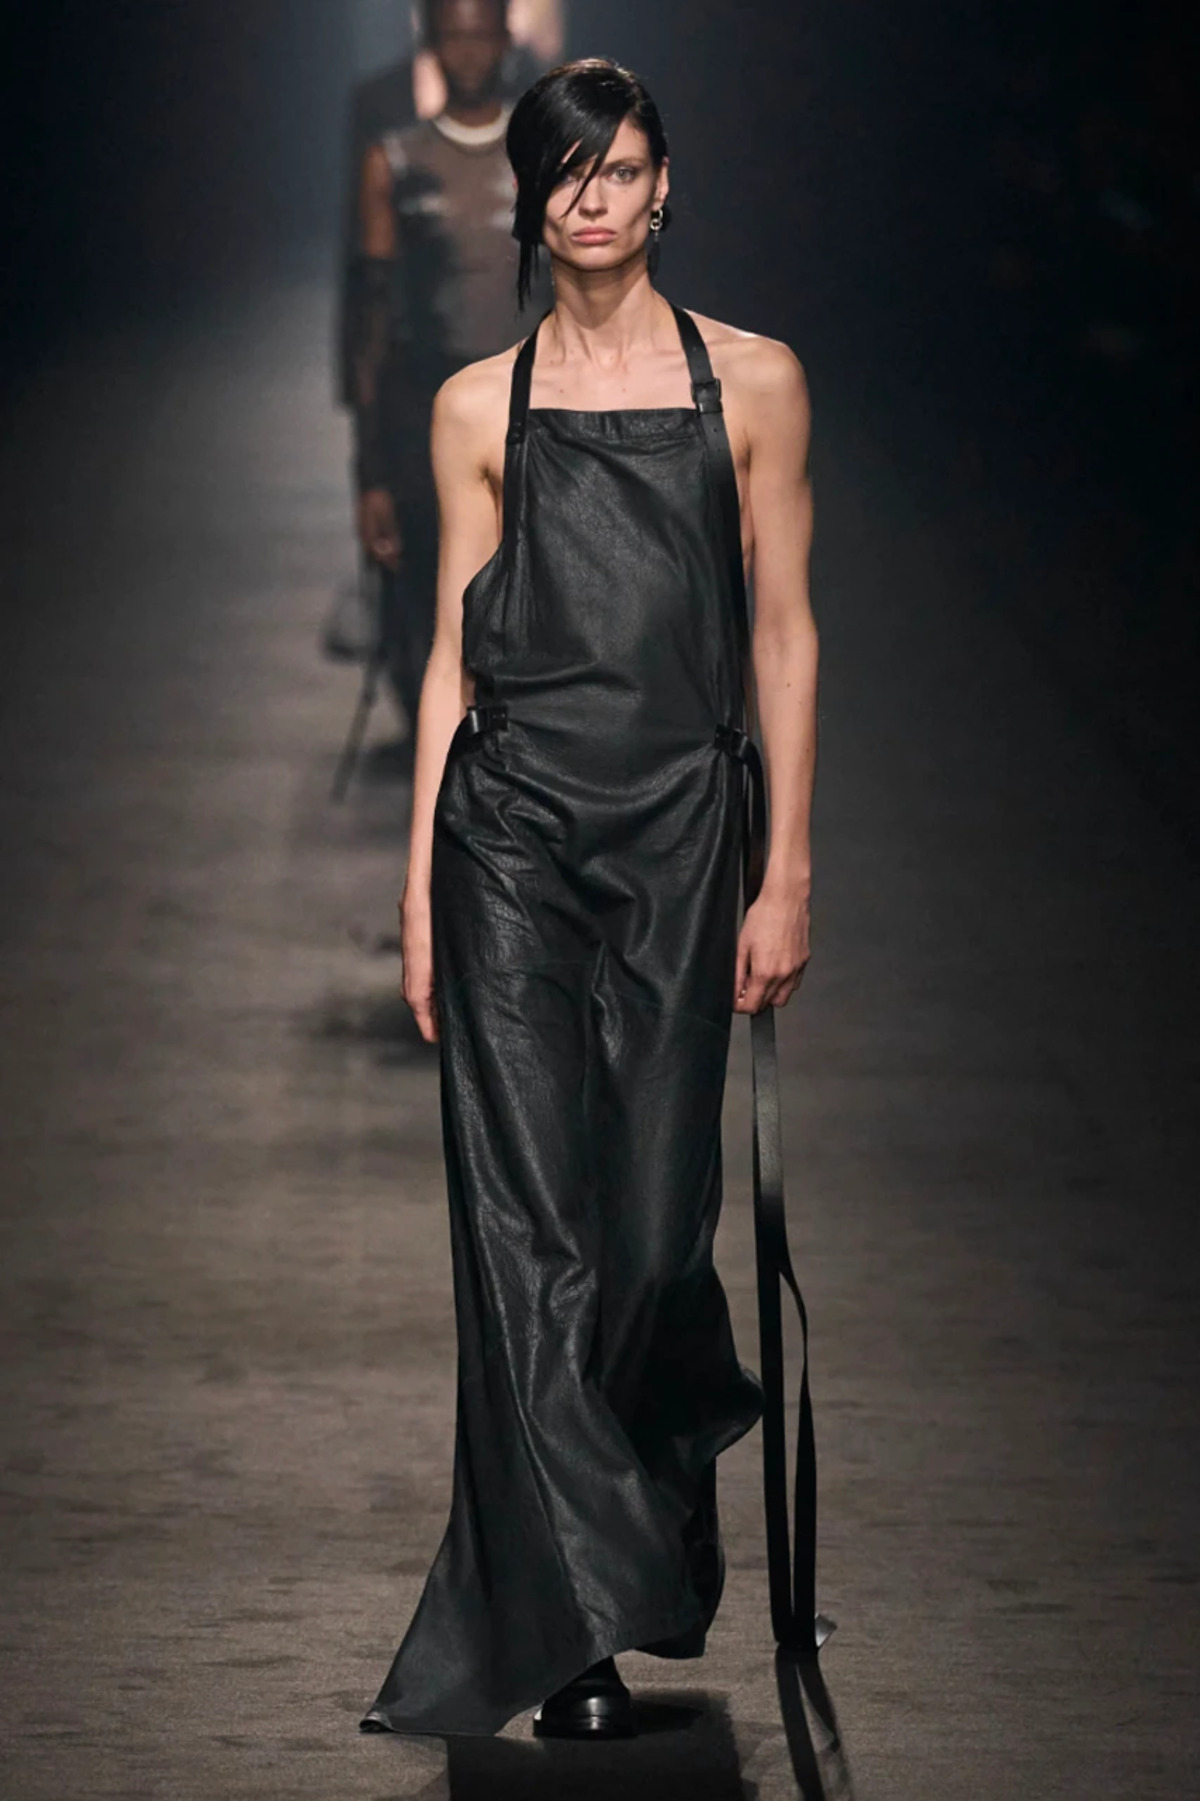 Ann Demeulemeester's Sexy, Gothic Legacy Lives On